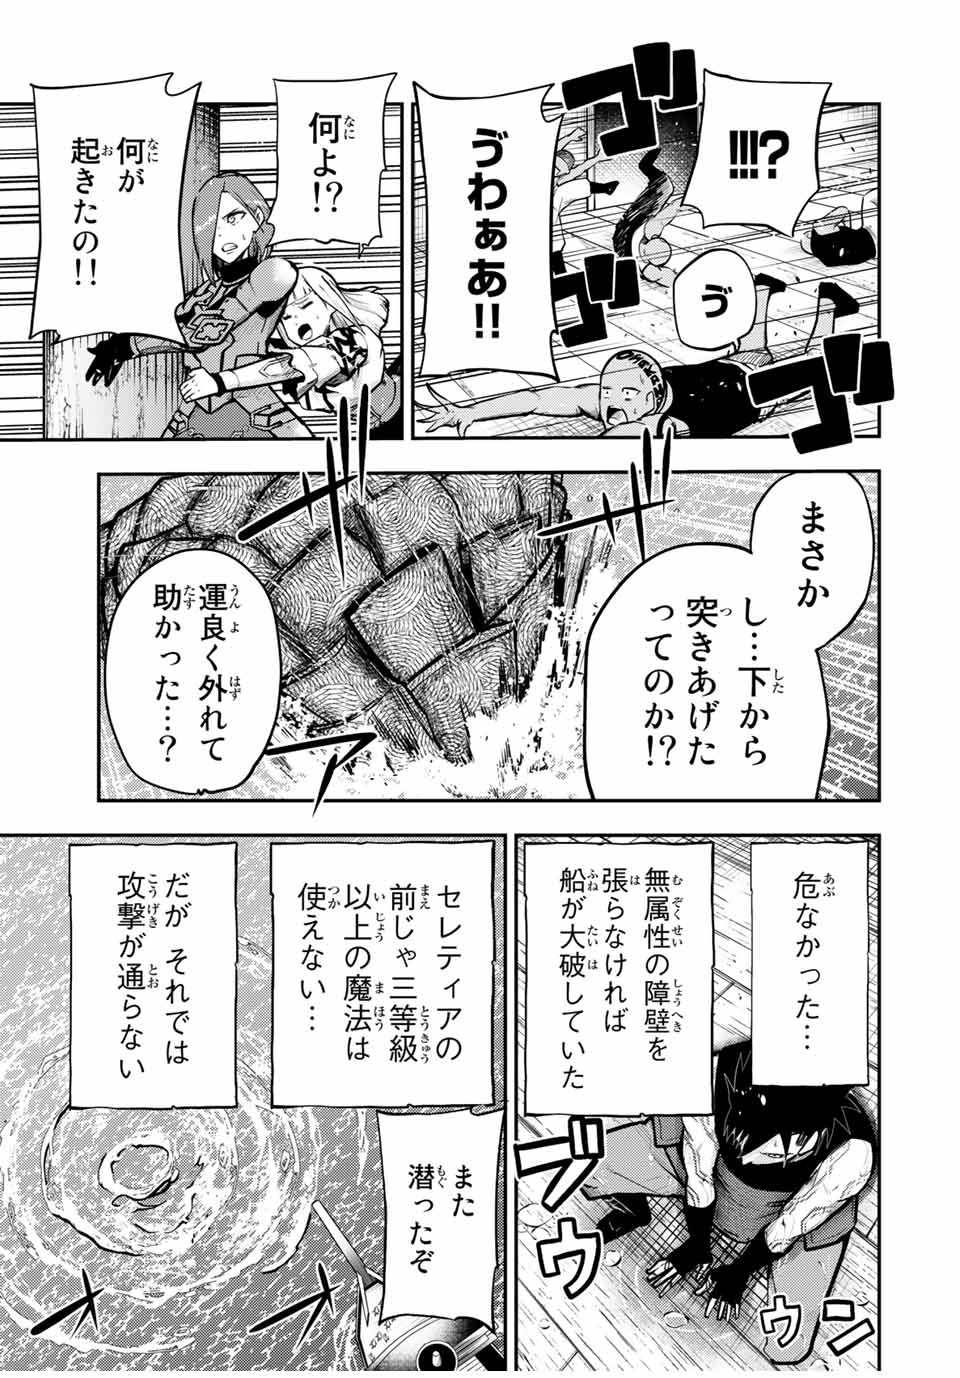 the strongest former prince-; 奴隷転生 ～その奴隷、最強の元王子につき～ 第40話 - Page 9